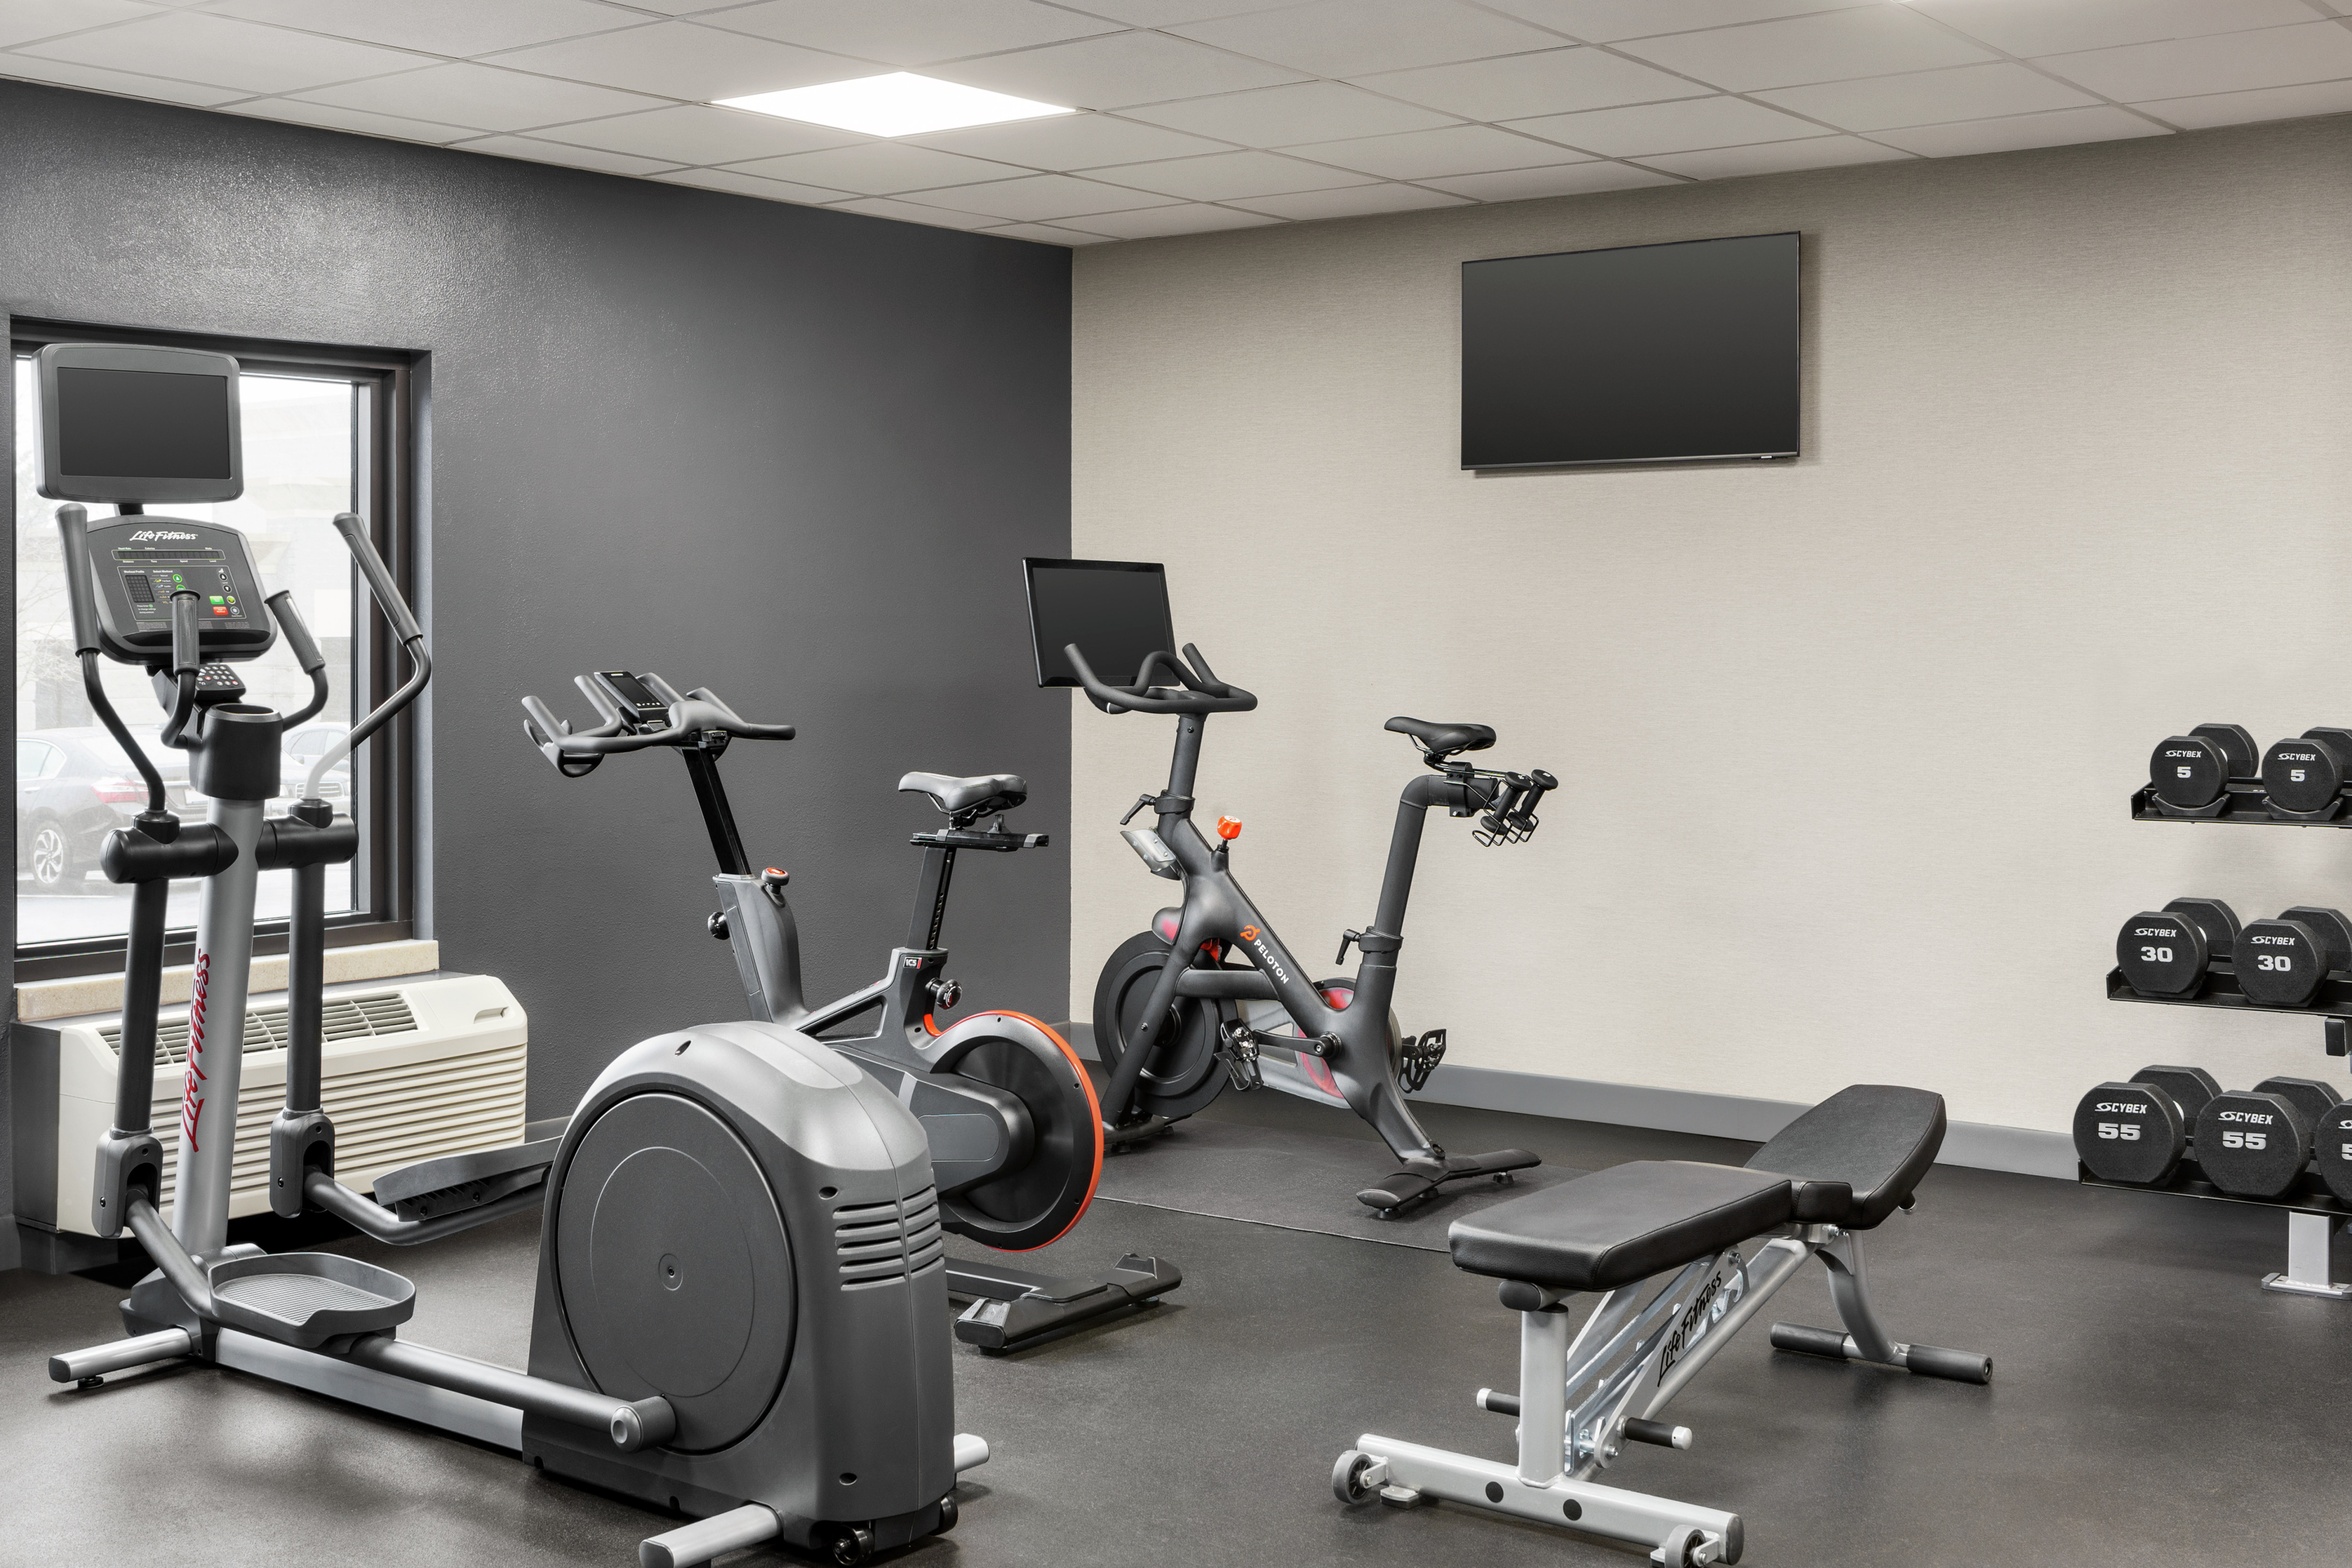 Convenient on-site fitness center featuring an array of exercise equipment options